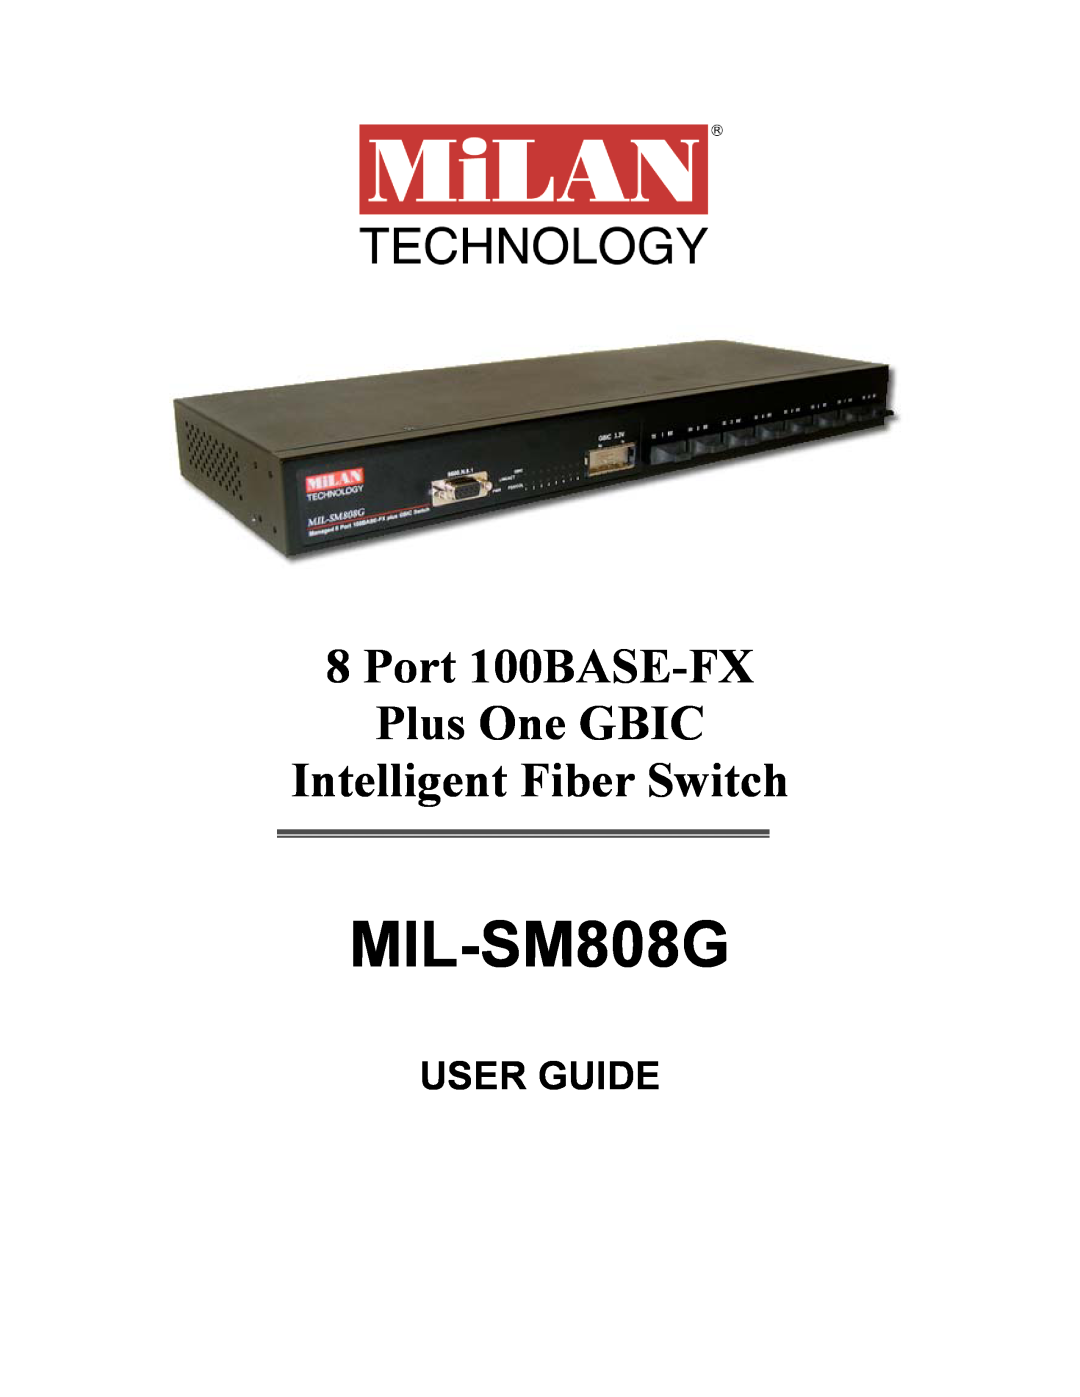 Milan Technology MIL-SM808G manual Port 100BASE-FX Plus One GBIC Intelligent Fiber Switch, User Guide 